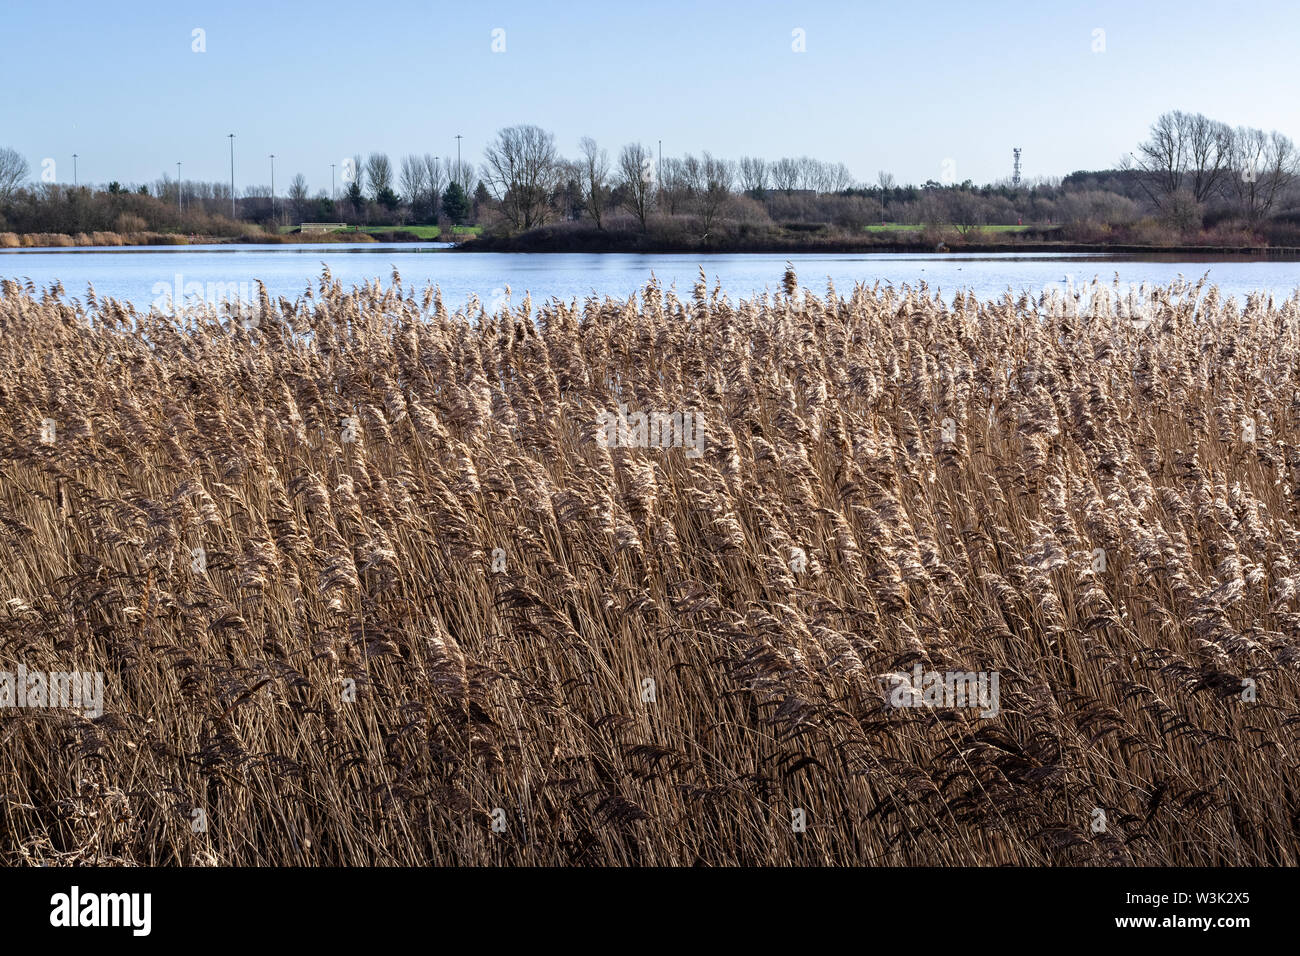 Dry grass field on lake side in late winter Stock Photo